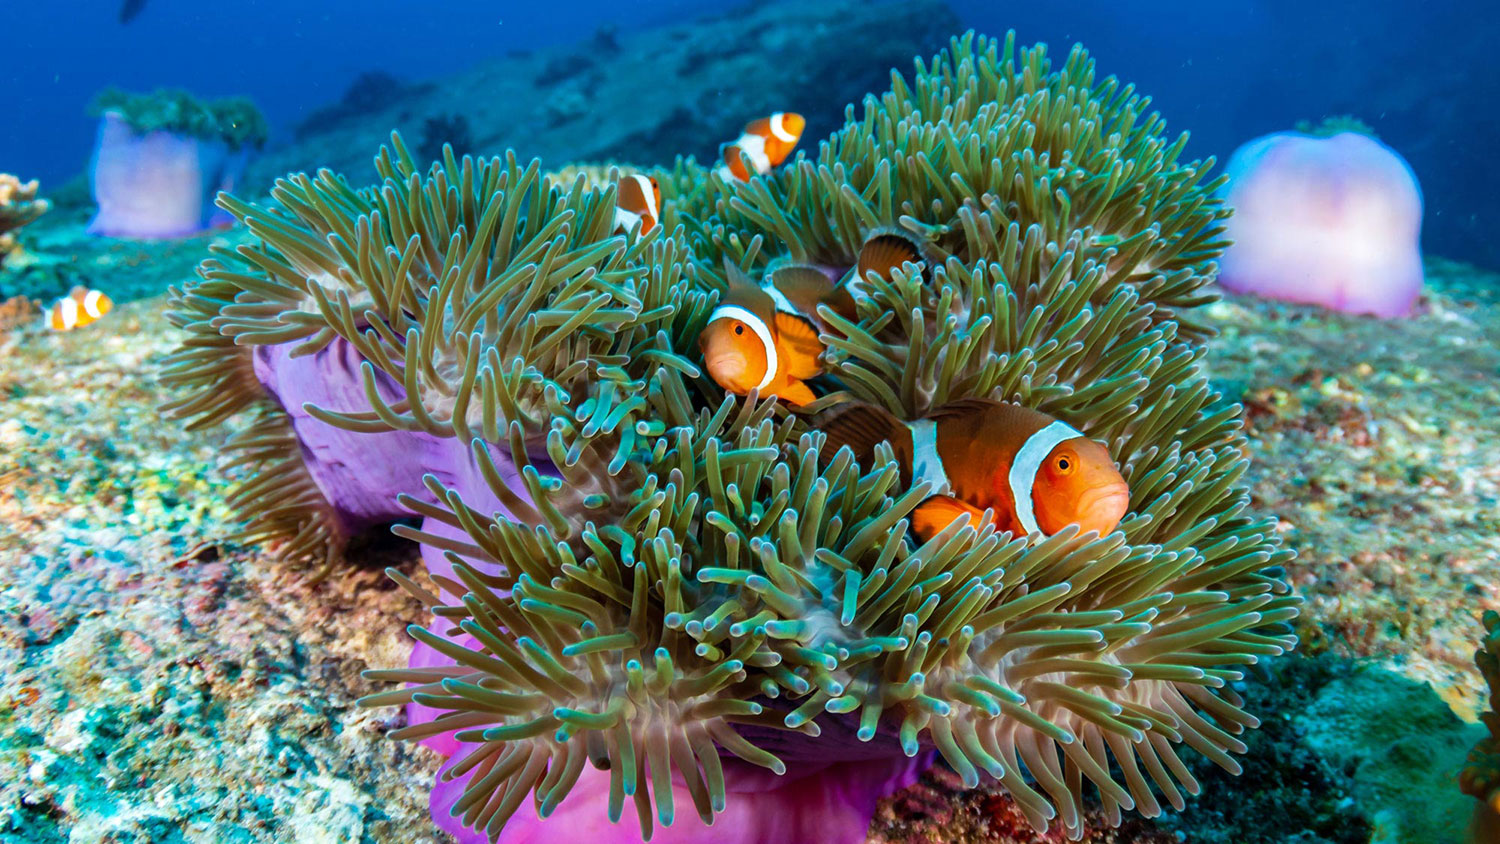 Family of cute Clownfish colorful anemone